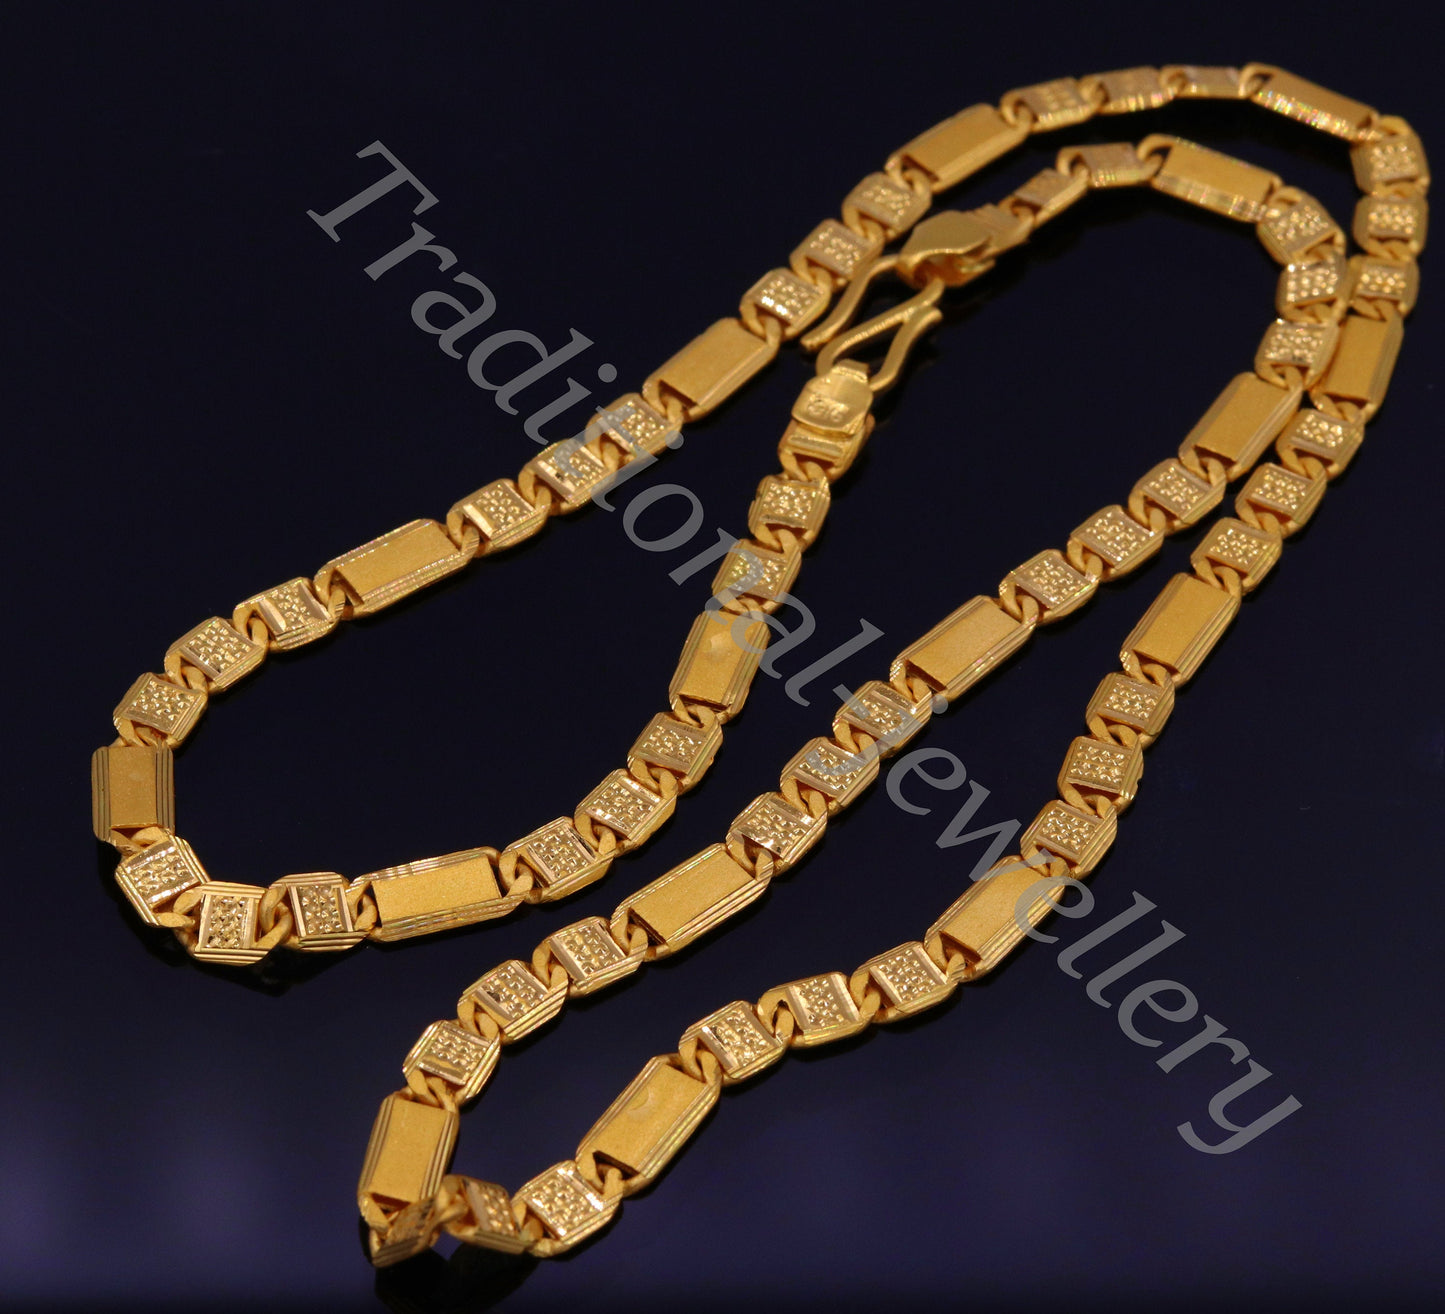 20 inches long handmade 22kt yellow gold royal navabi nawabi chain necklace gorgeous diamond cut design india jewelry for gifting - TRIBAL ORNAMENTS